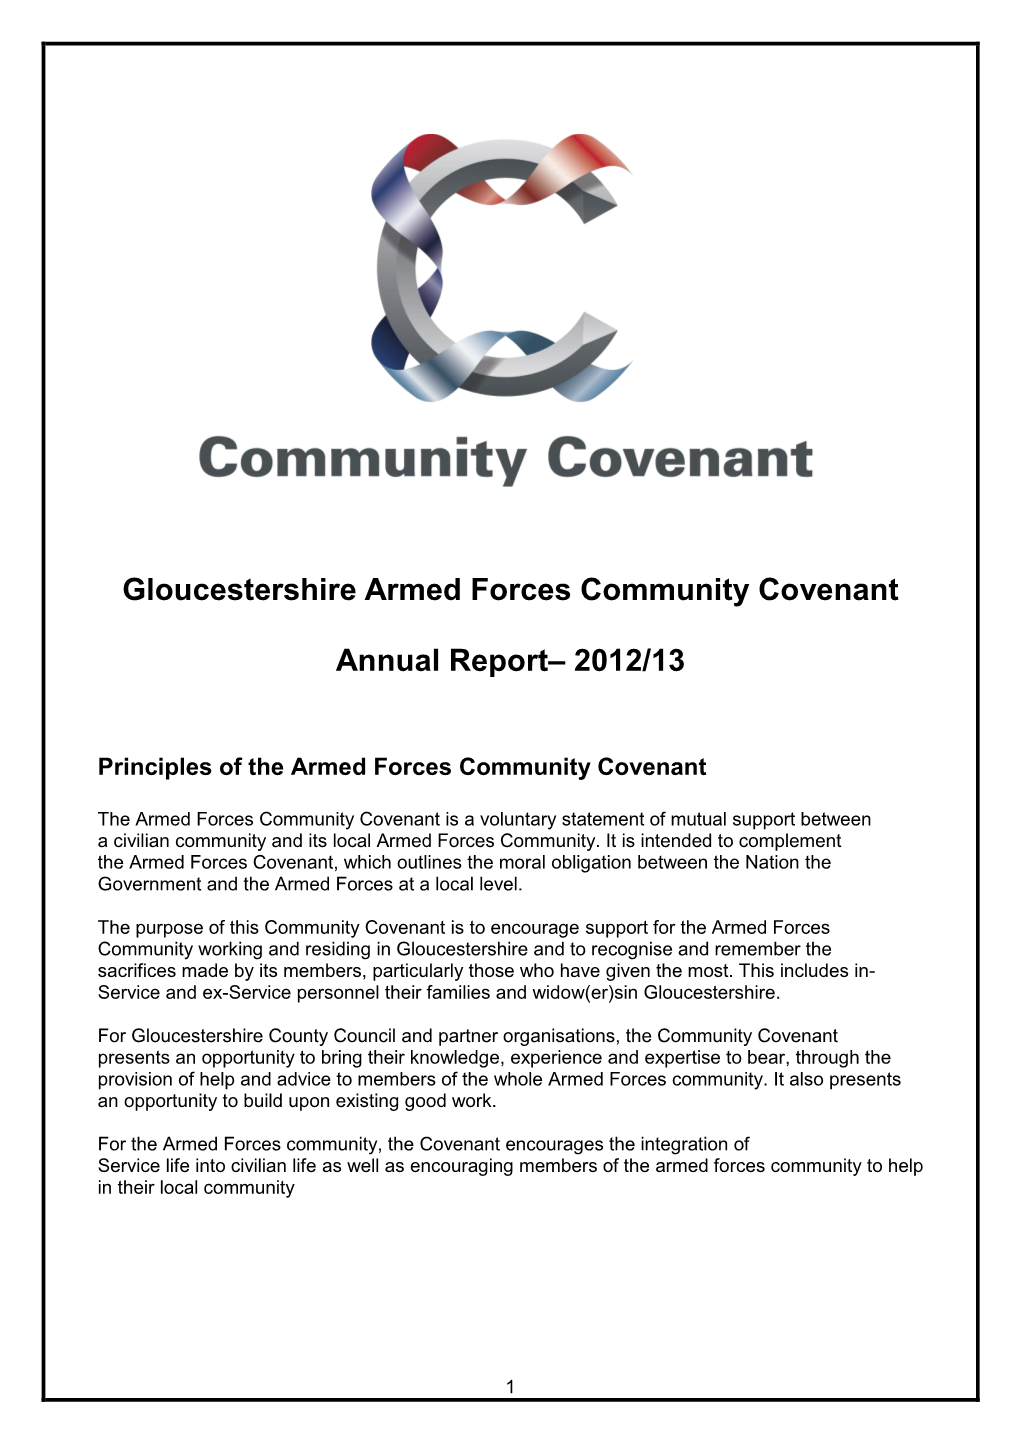 Gloucestershire Armed Forces Community Covenant Annual Report